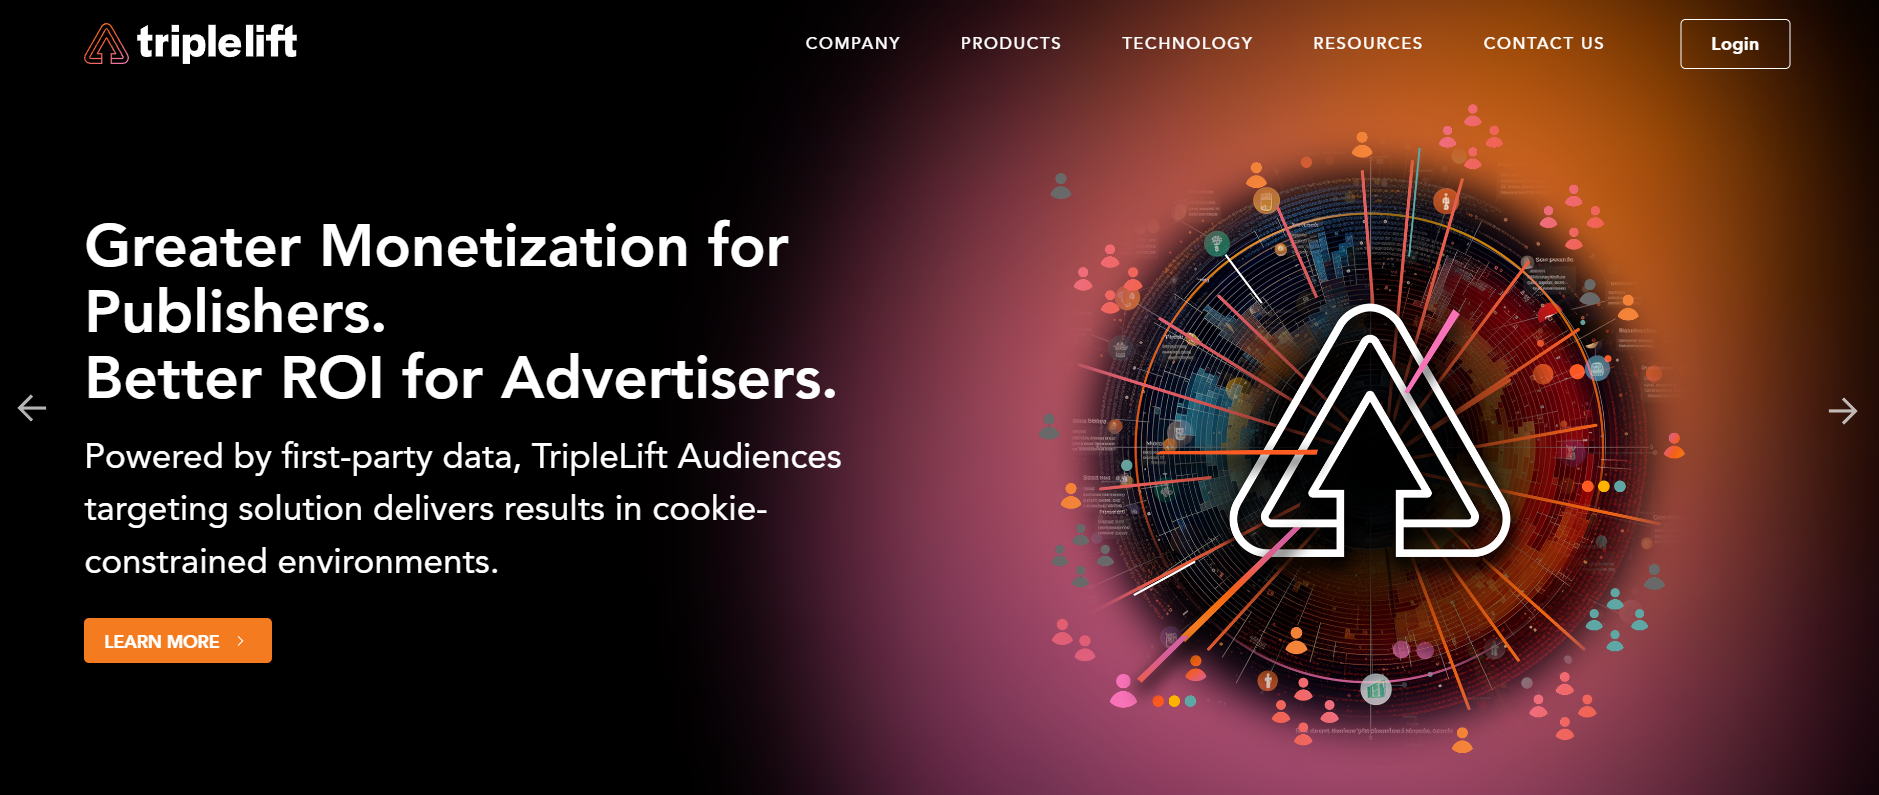 TripleLift- Best Native Ad Networks For Publishers